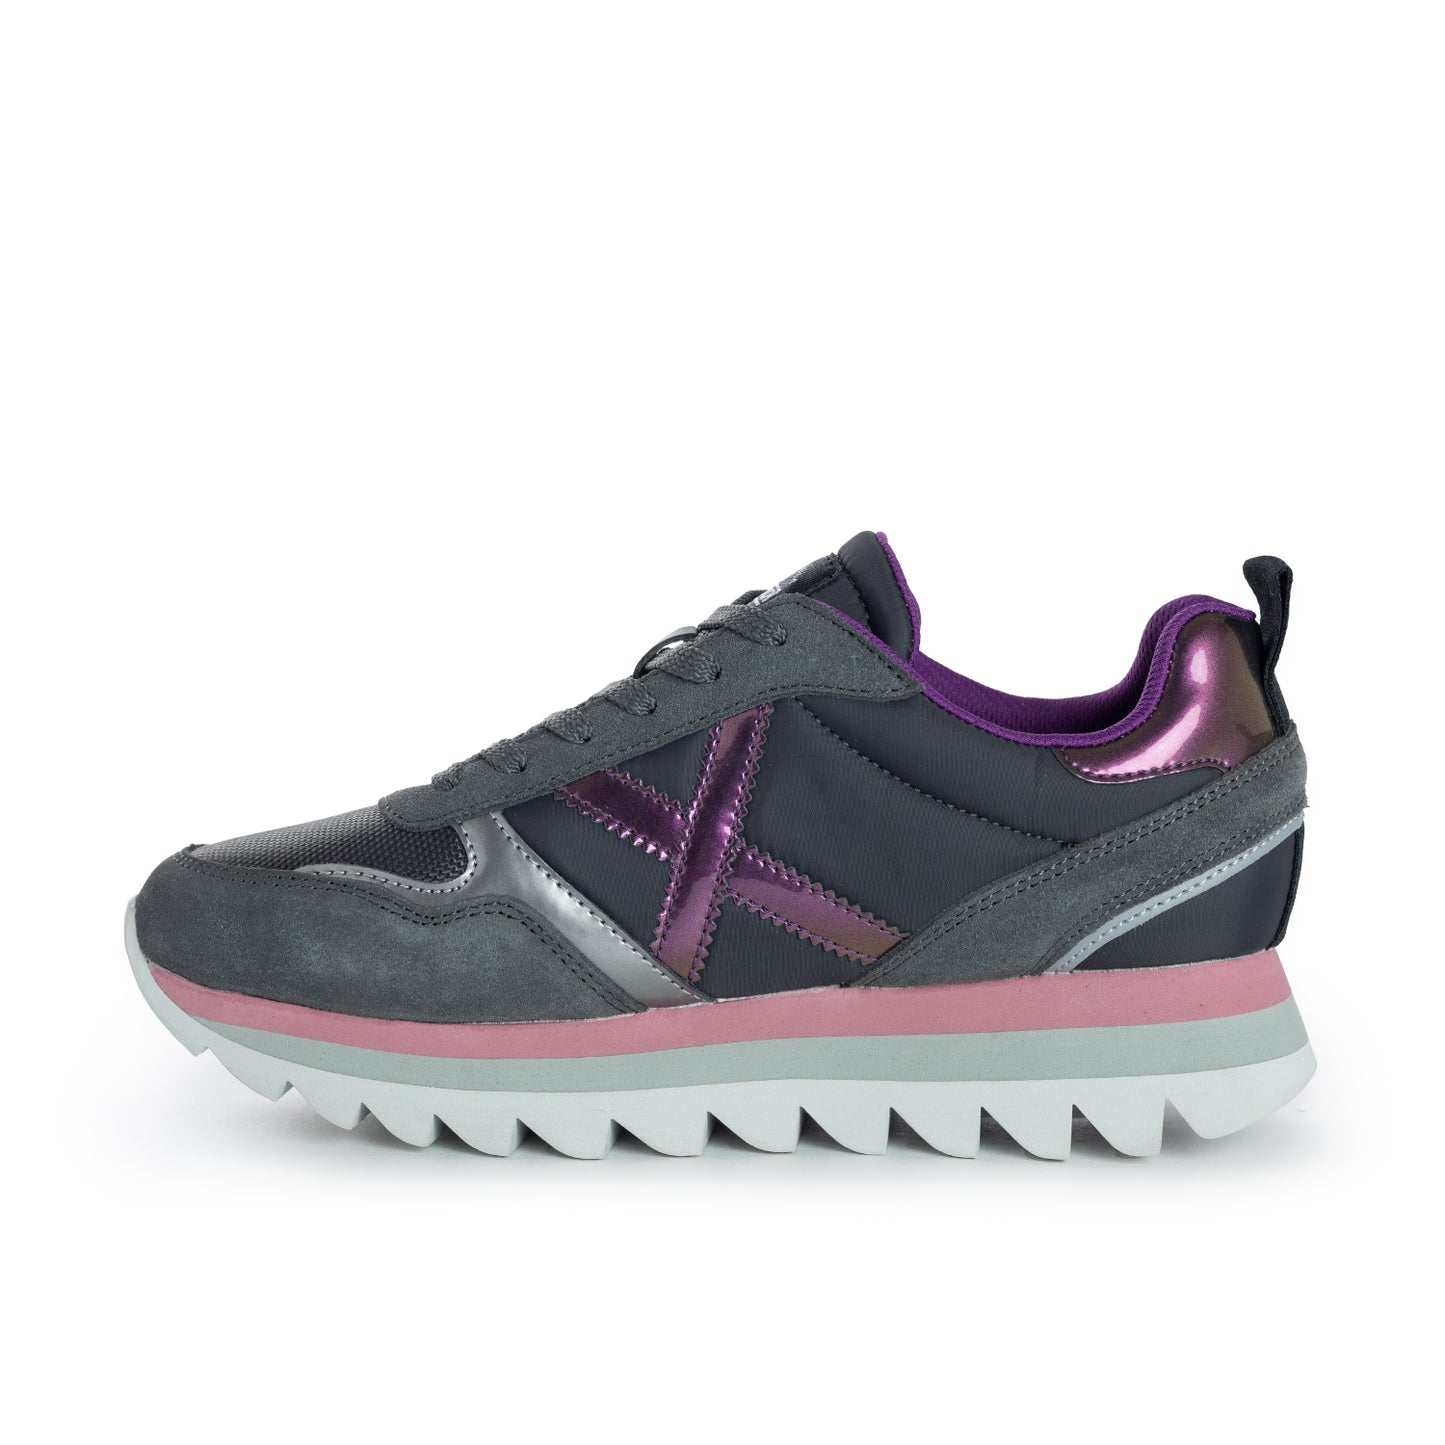 MUNICH | SNEAKERS MUJER | RIPPLE 50 | GRIS